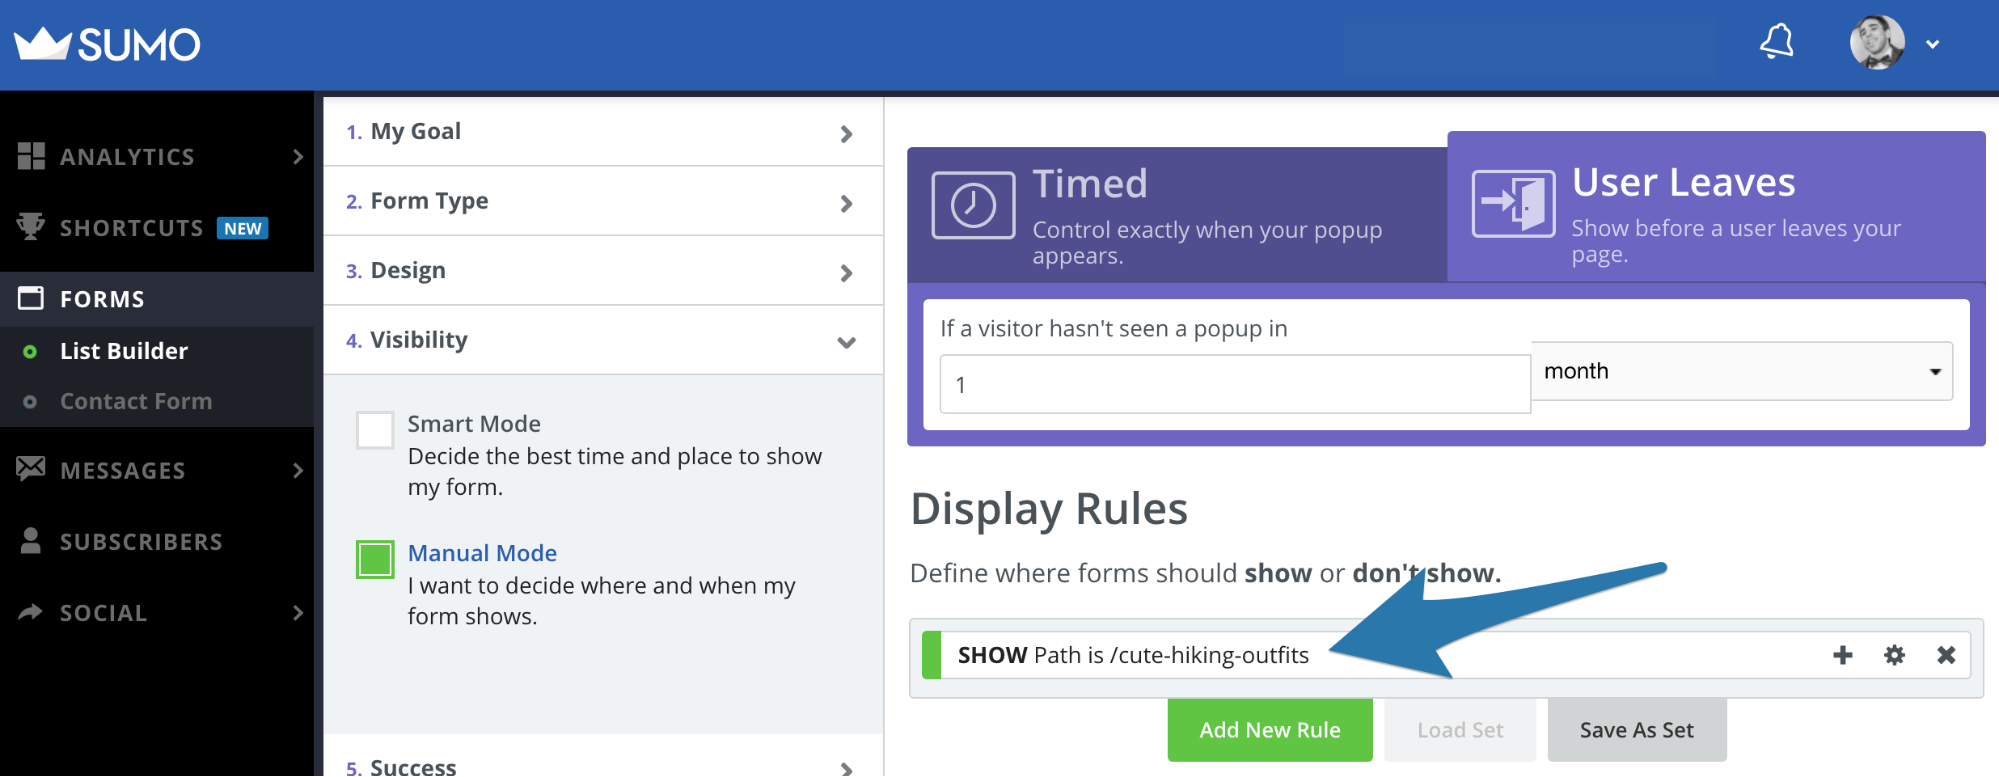 Screenshot showing popup settings page on the Sumo dashboard